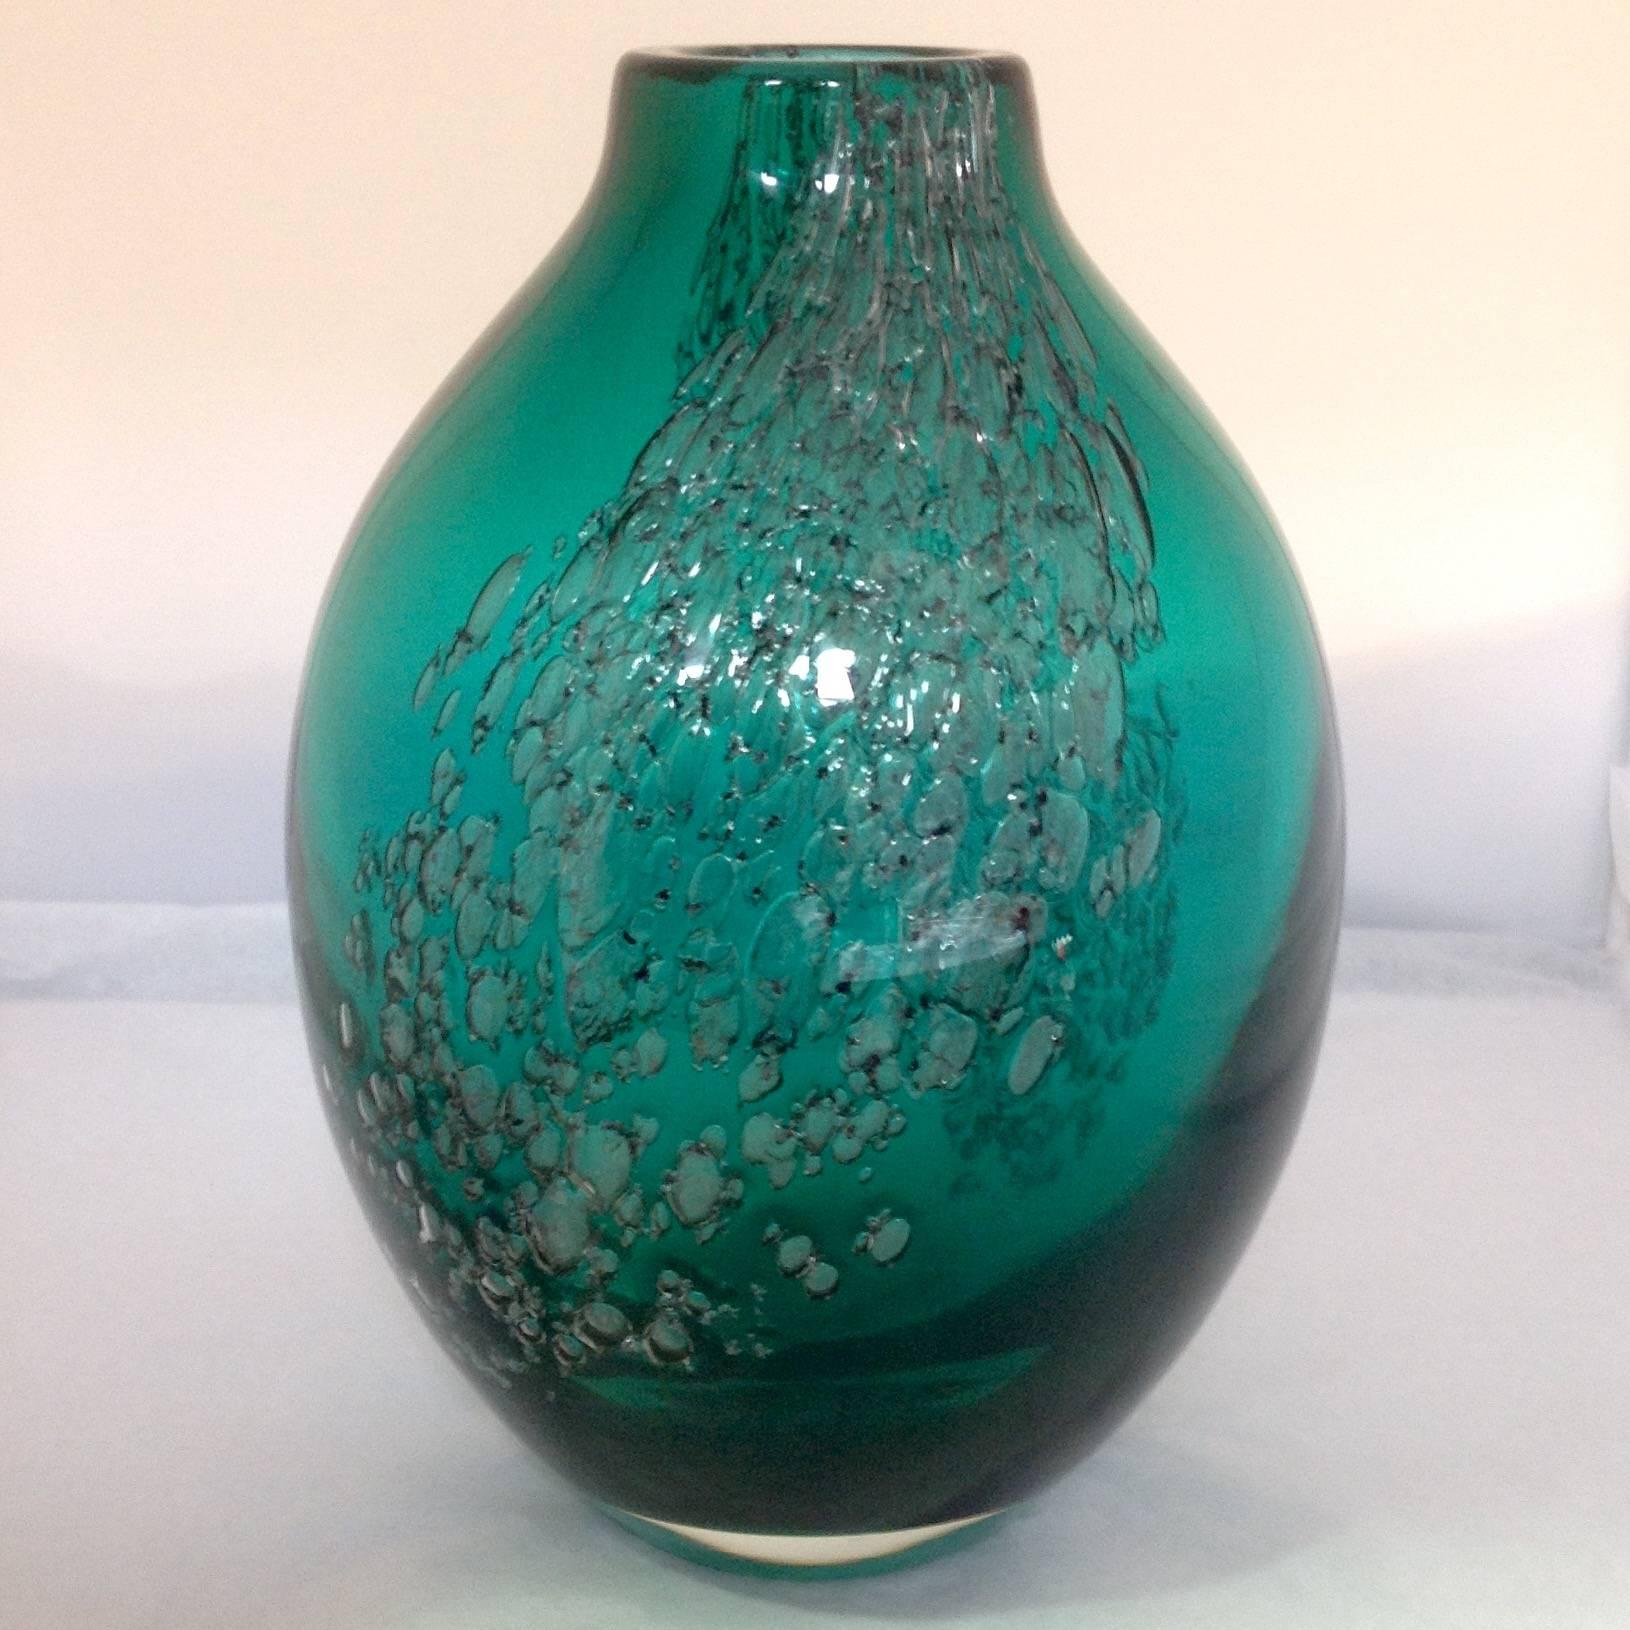 Emerald green glass vase by Maurice Marinot with random trapped air bubbles, 
French, 1882–1960.